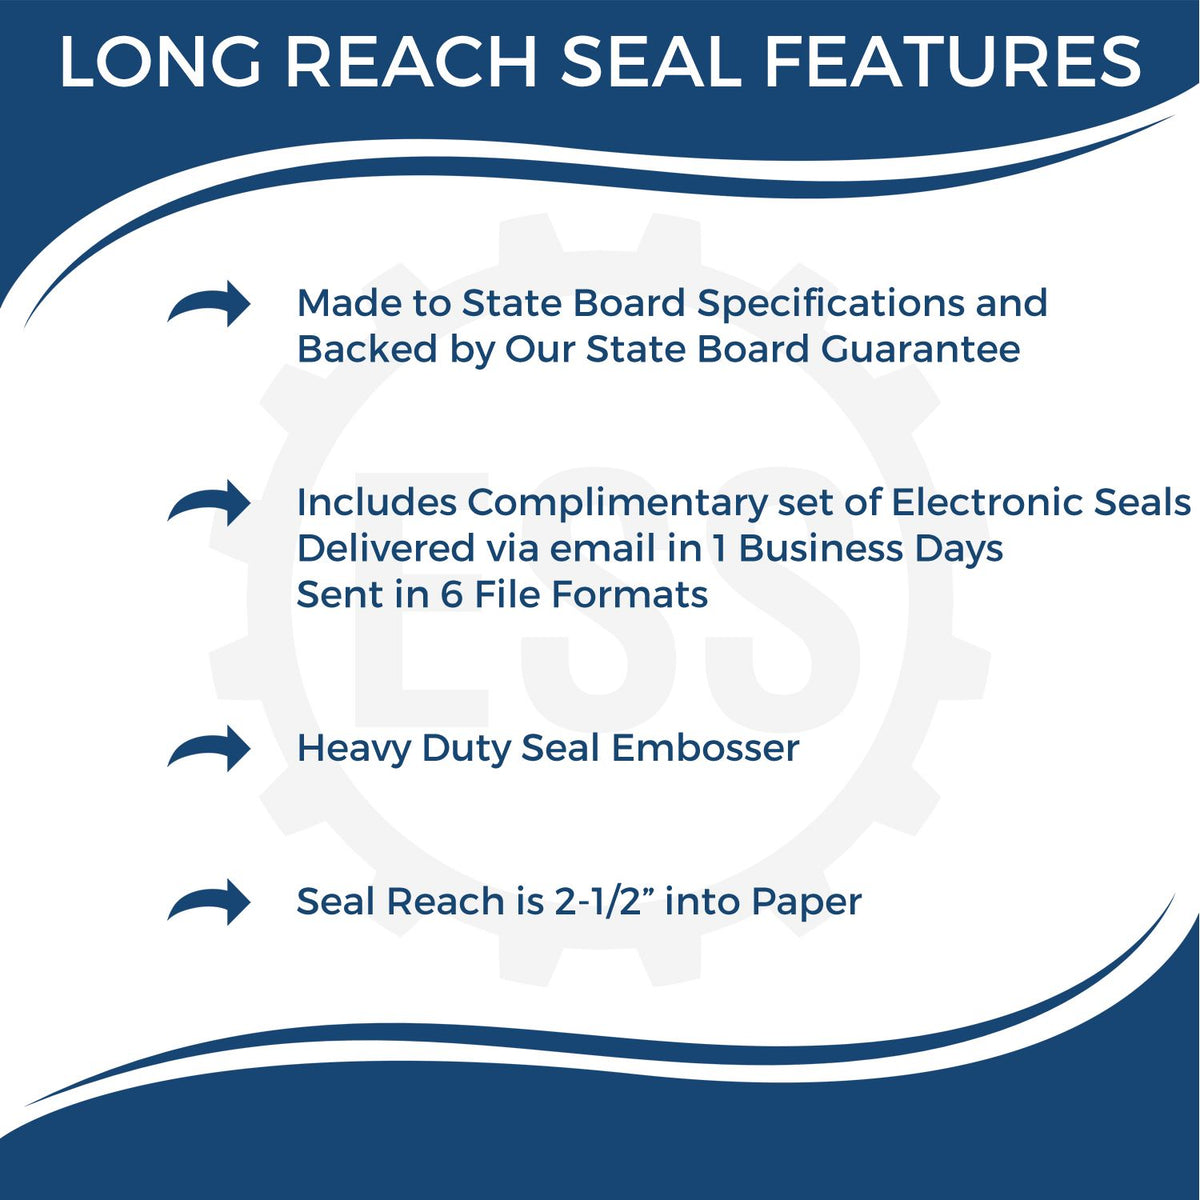 A picture of an infographic highlighting the selling points for the Long Reach Mississippi Land Surveyor Seal